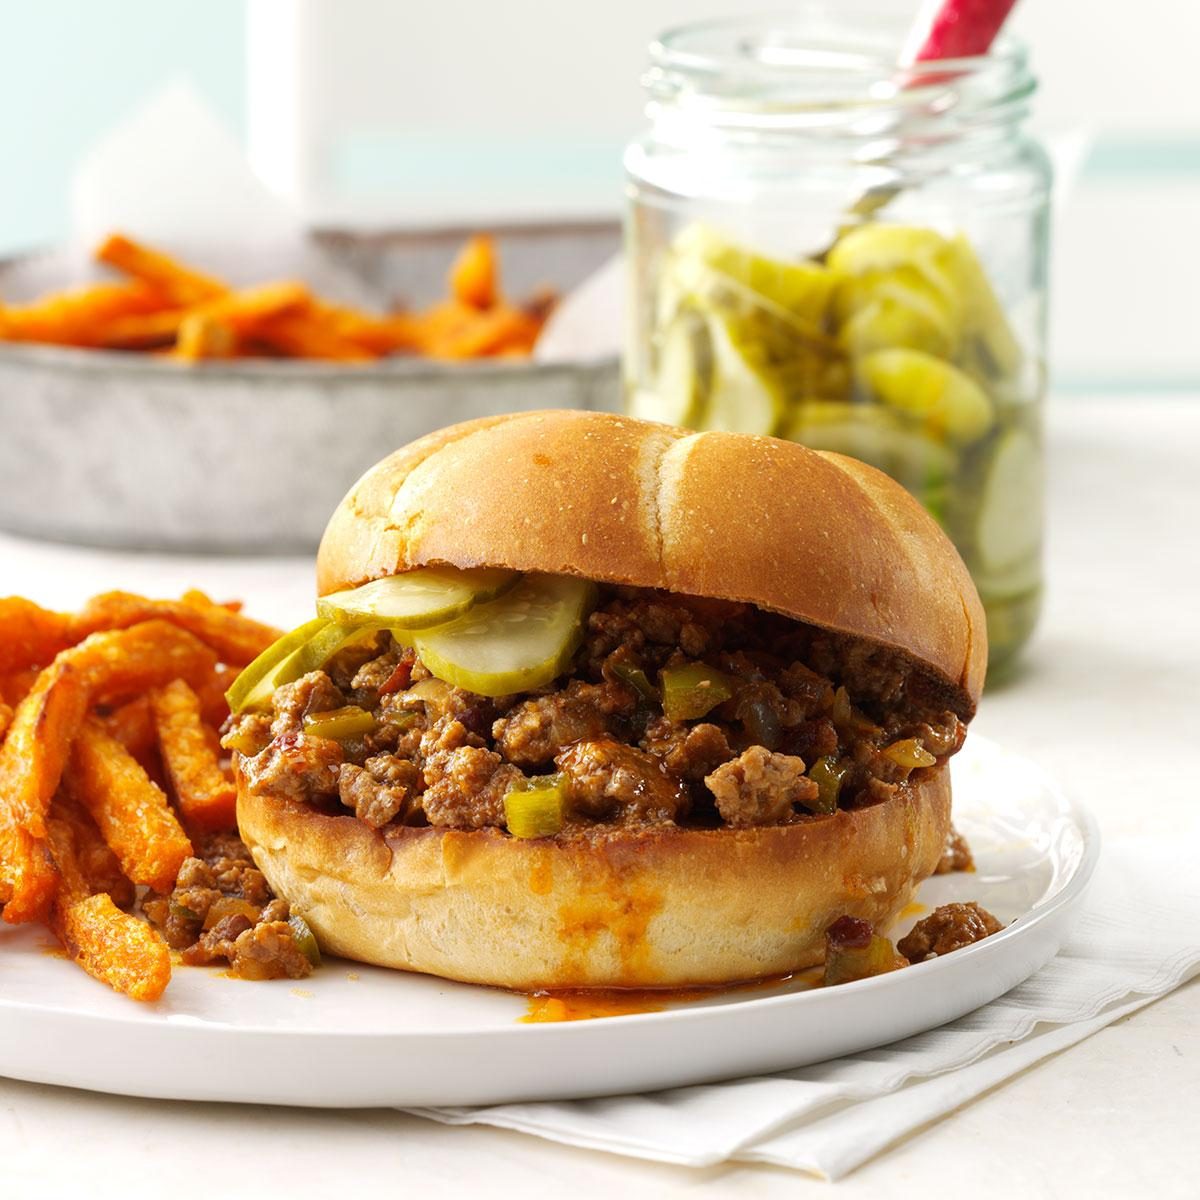 <p>My husband didn't like sloppy joes until he tried my rendition with its smoky heat. If you need to dial down the fiery zip, cut down on or eliminate the peppers. —Brittany Allyn, Mesa, Arizona </p> <div class="listicle-page__buttons"> <div class="listicle-page__cta-button"><a href='https://www.tasteofhome.com/recipes/chipotle-chili-sloppy-joes/'>Go to Recipe</a></div> </div>